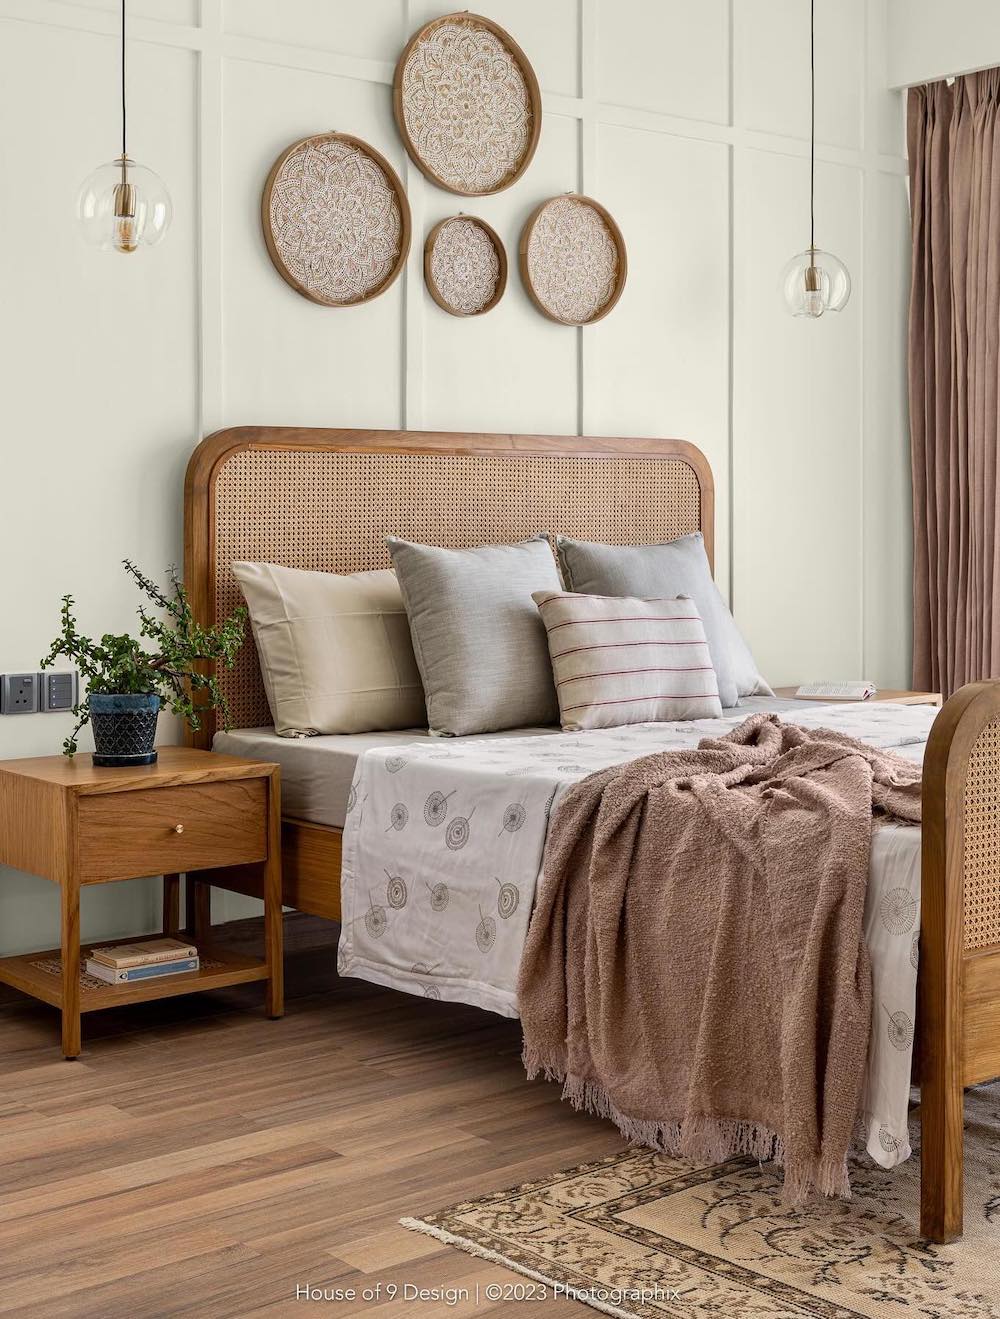 a bohemian bedroom with cocoa colored linens and touches of grey and green